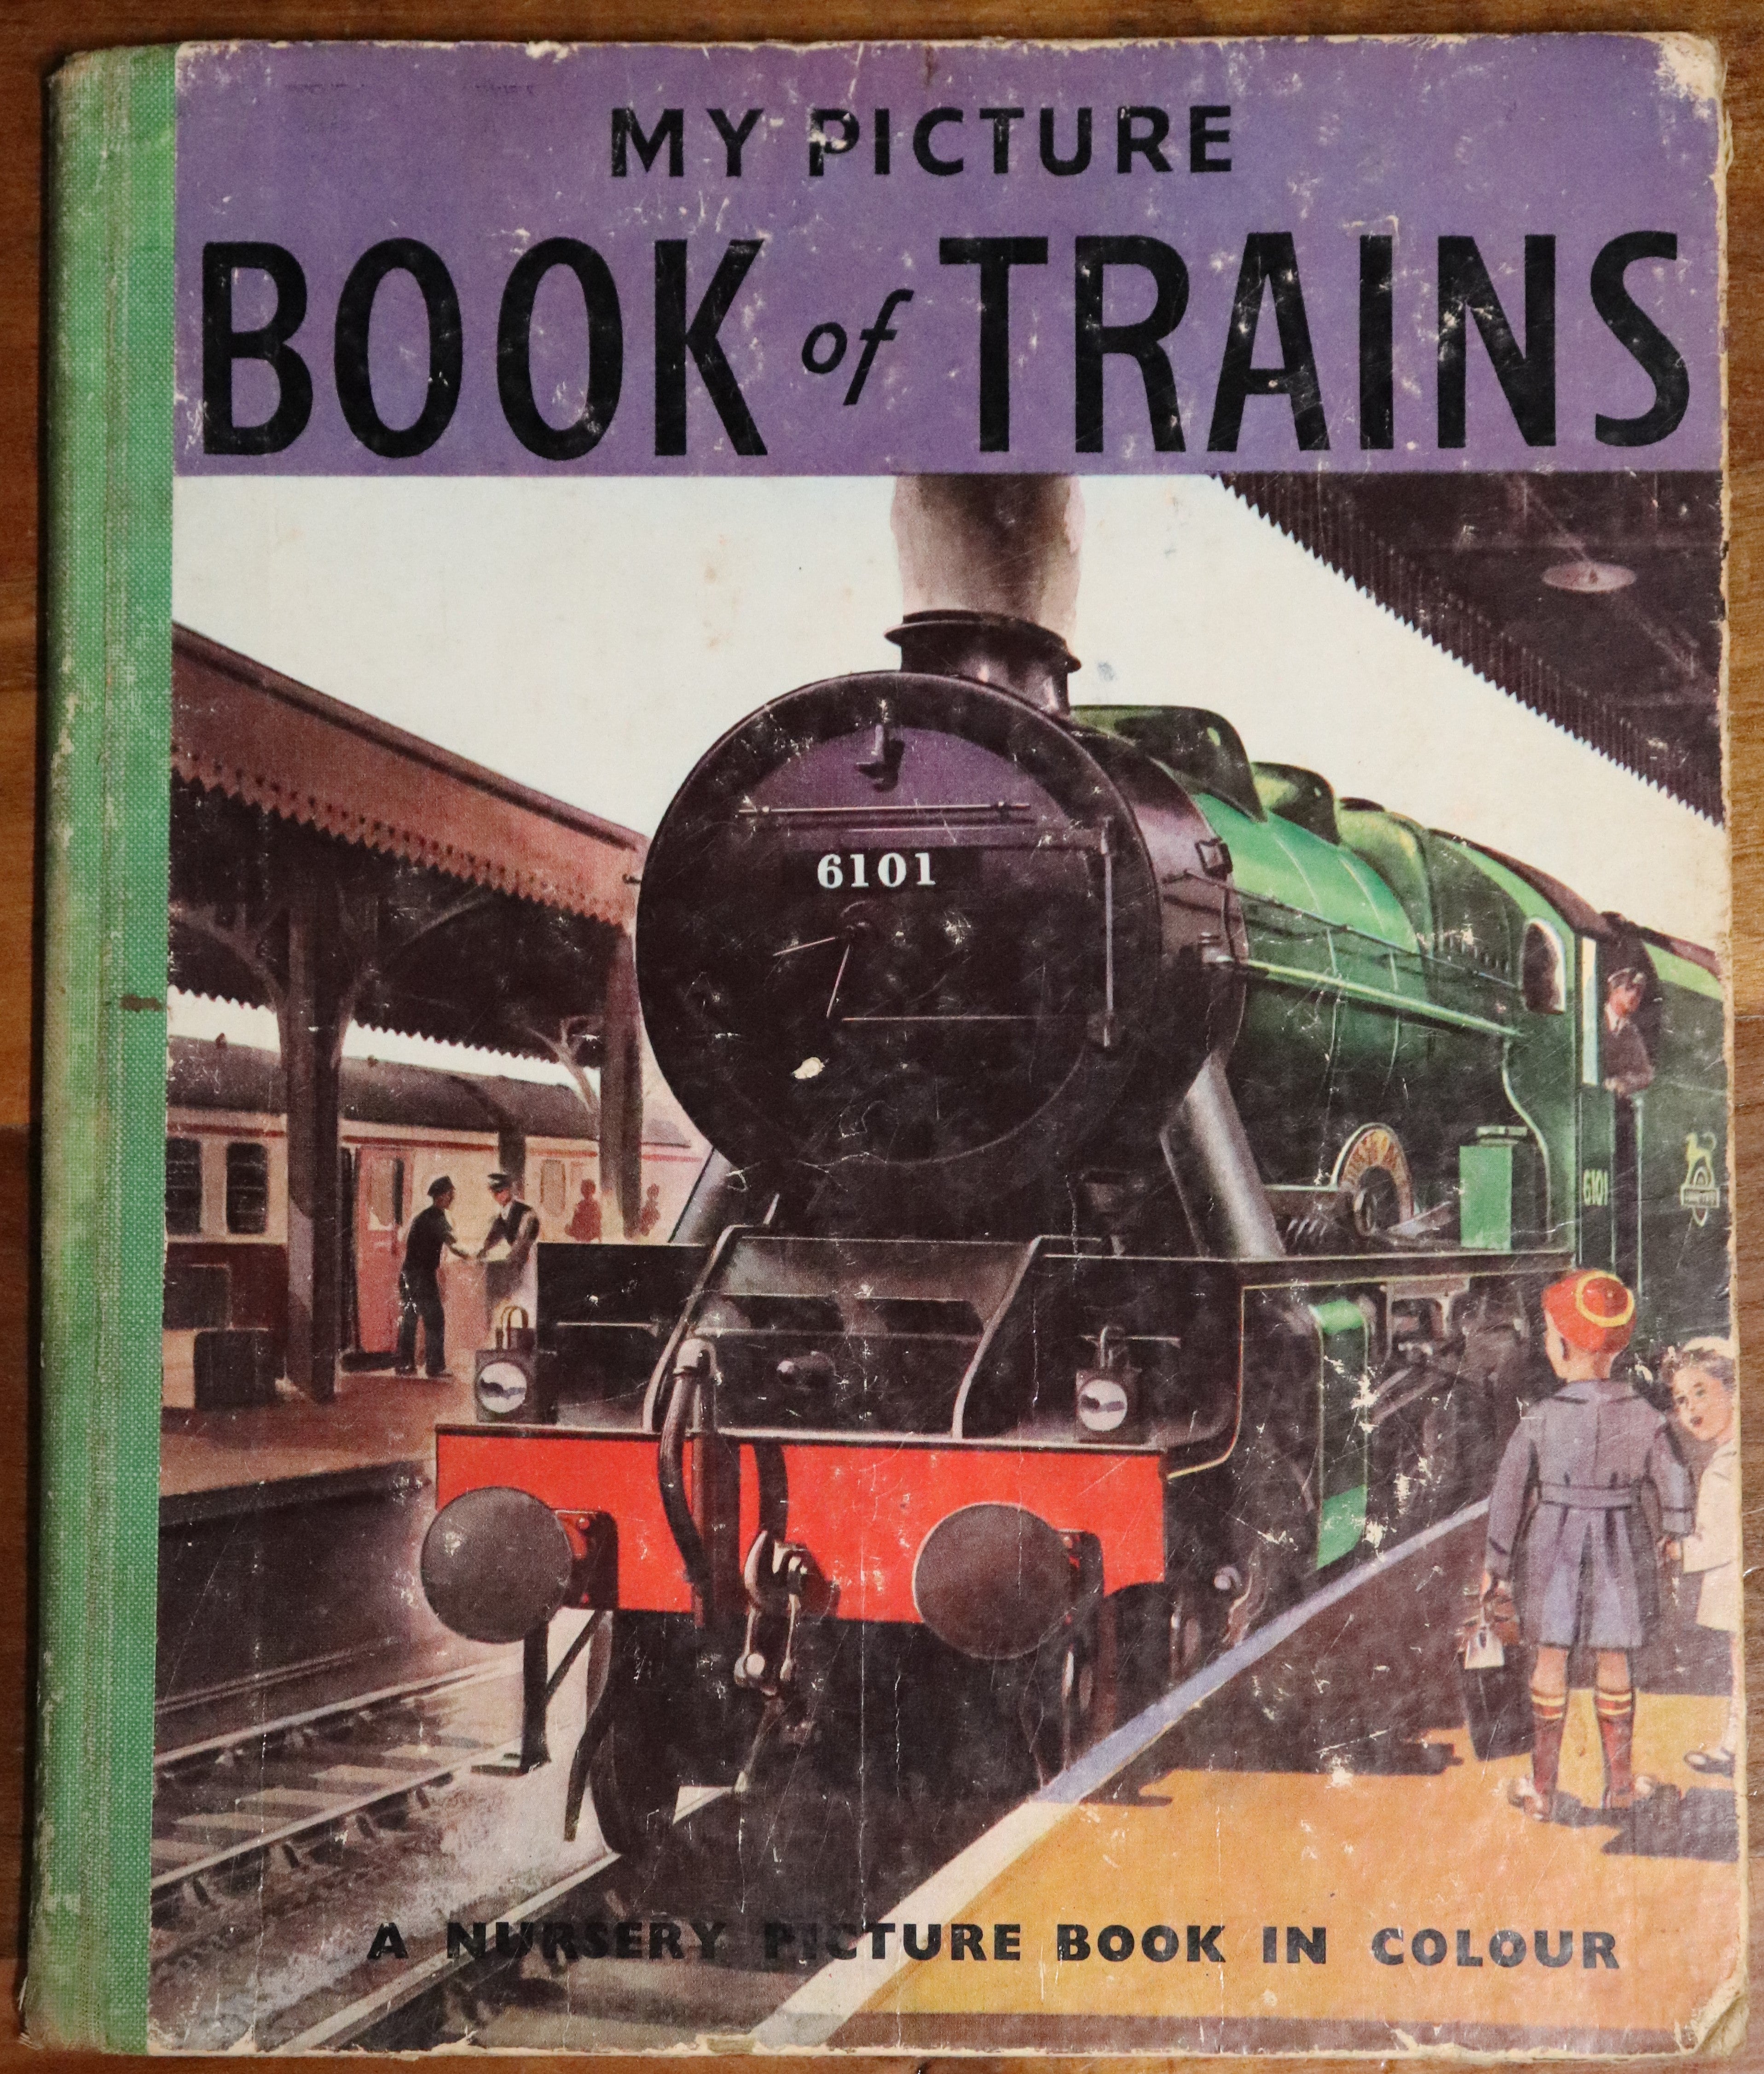 My Picture Book Of Trains - c1949 - Antique Childrens Book